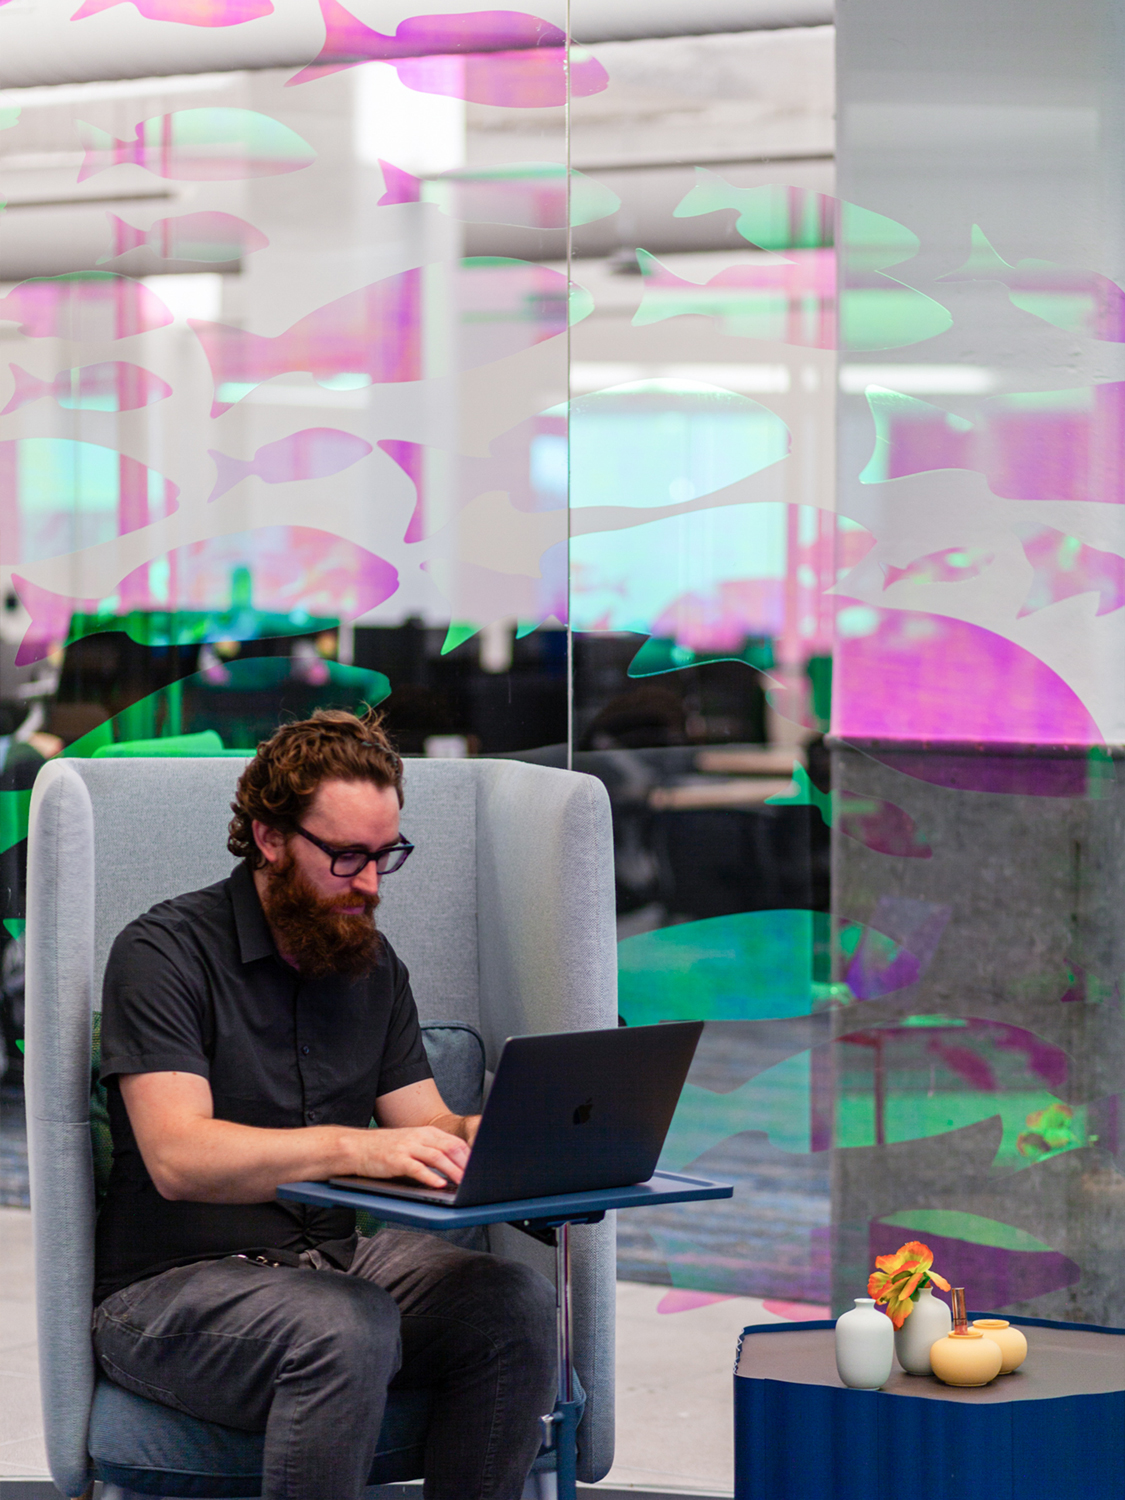 Dichroic graphics on glass depicting fish with a person in a chair using a laptop